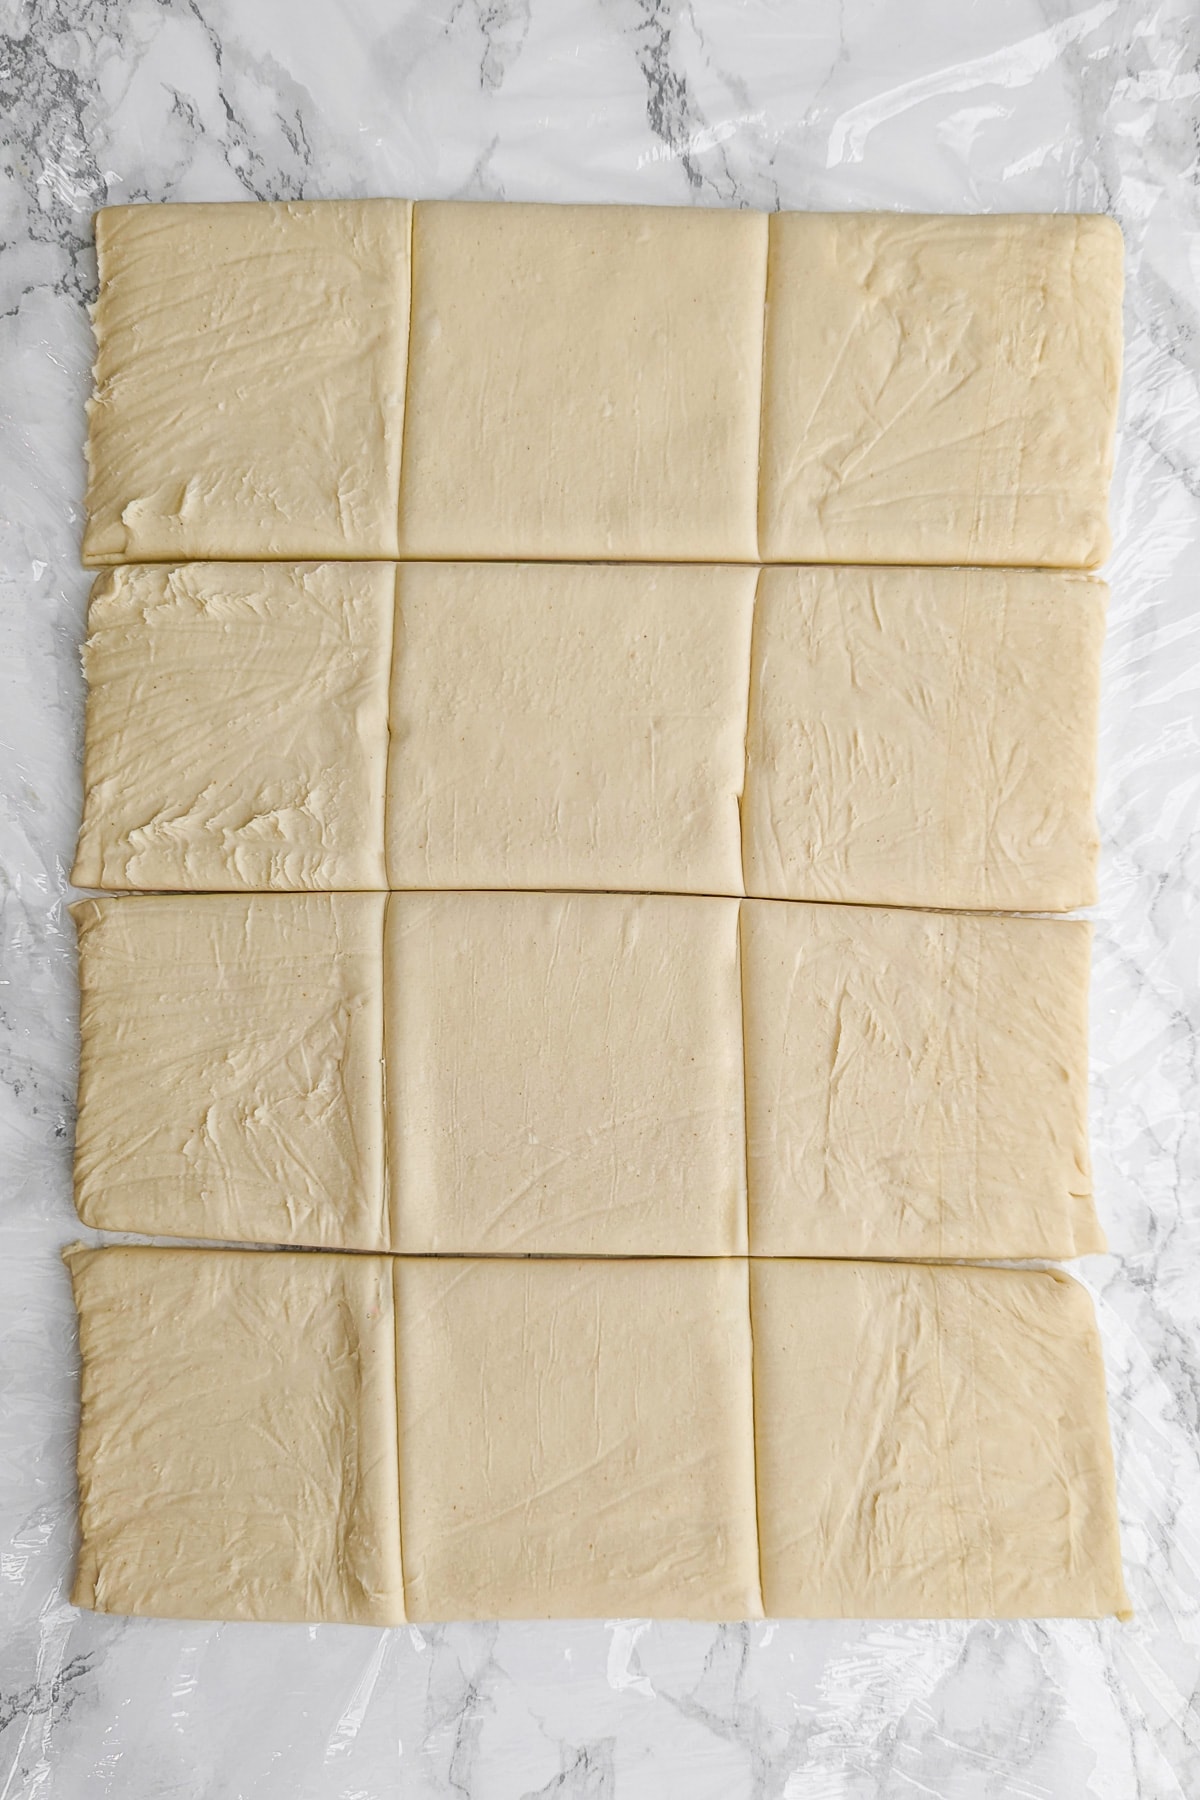 A sheet of dough divided into 12 squares of the same size.